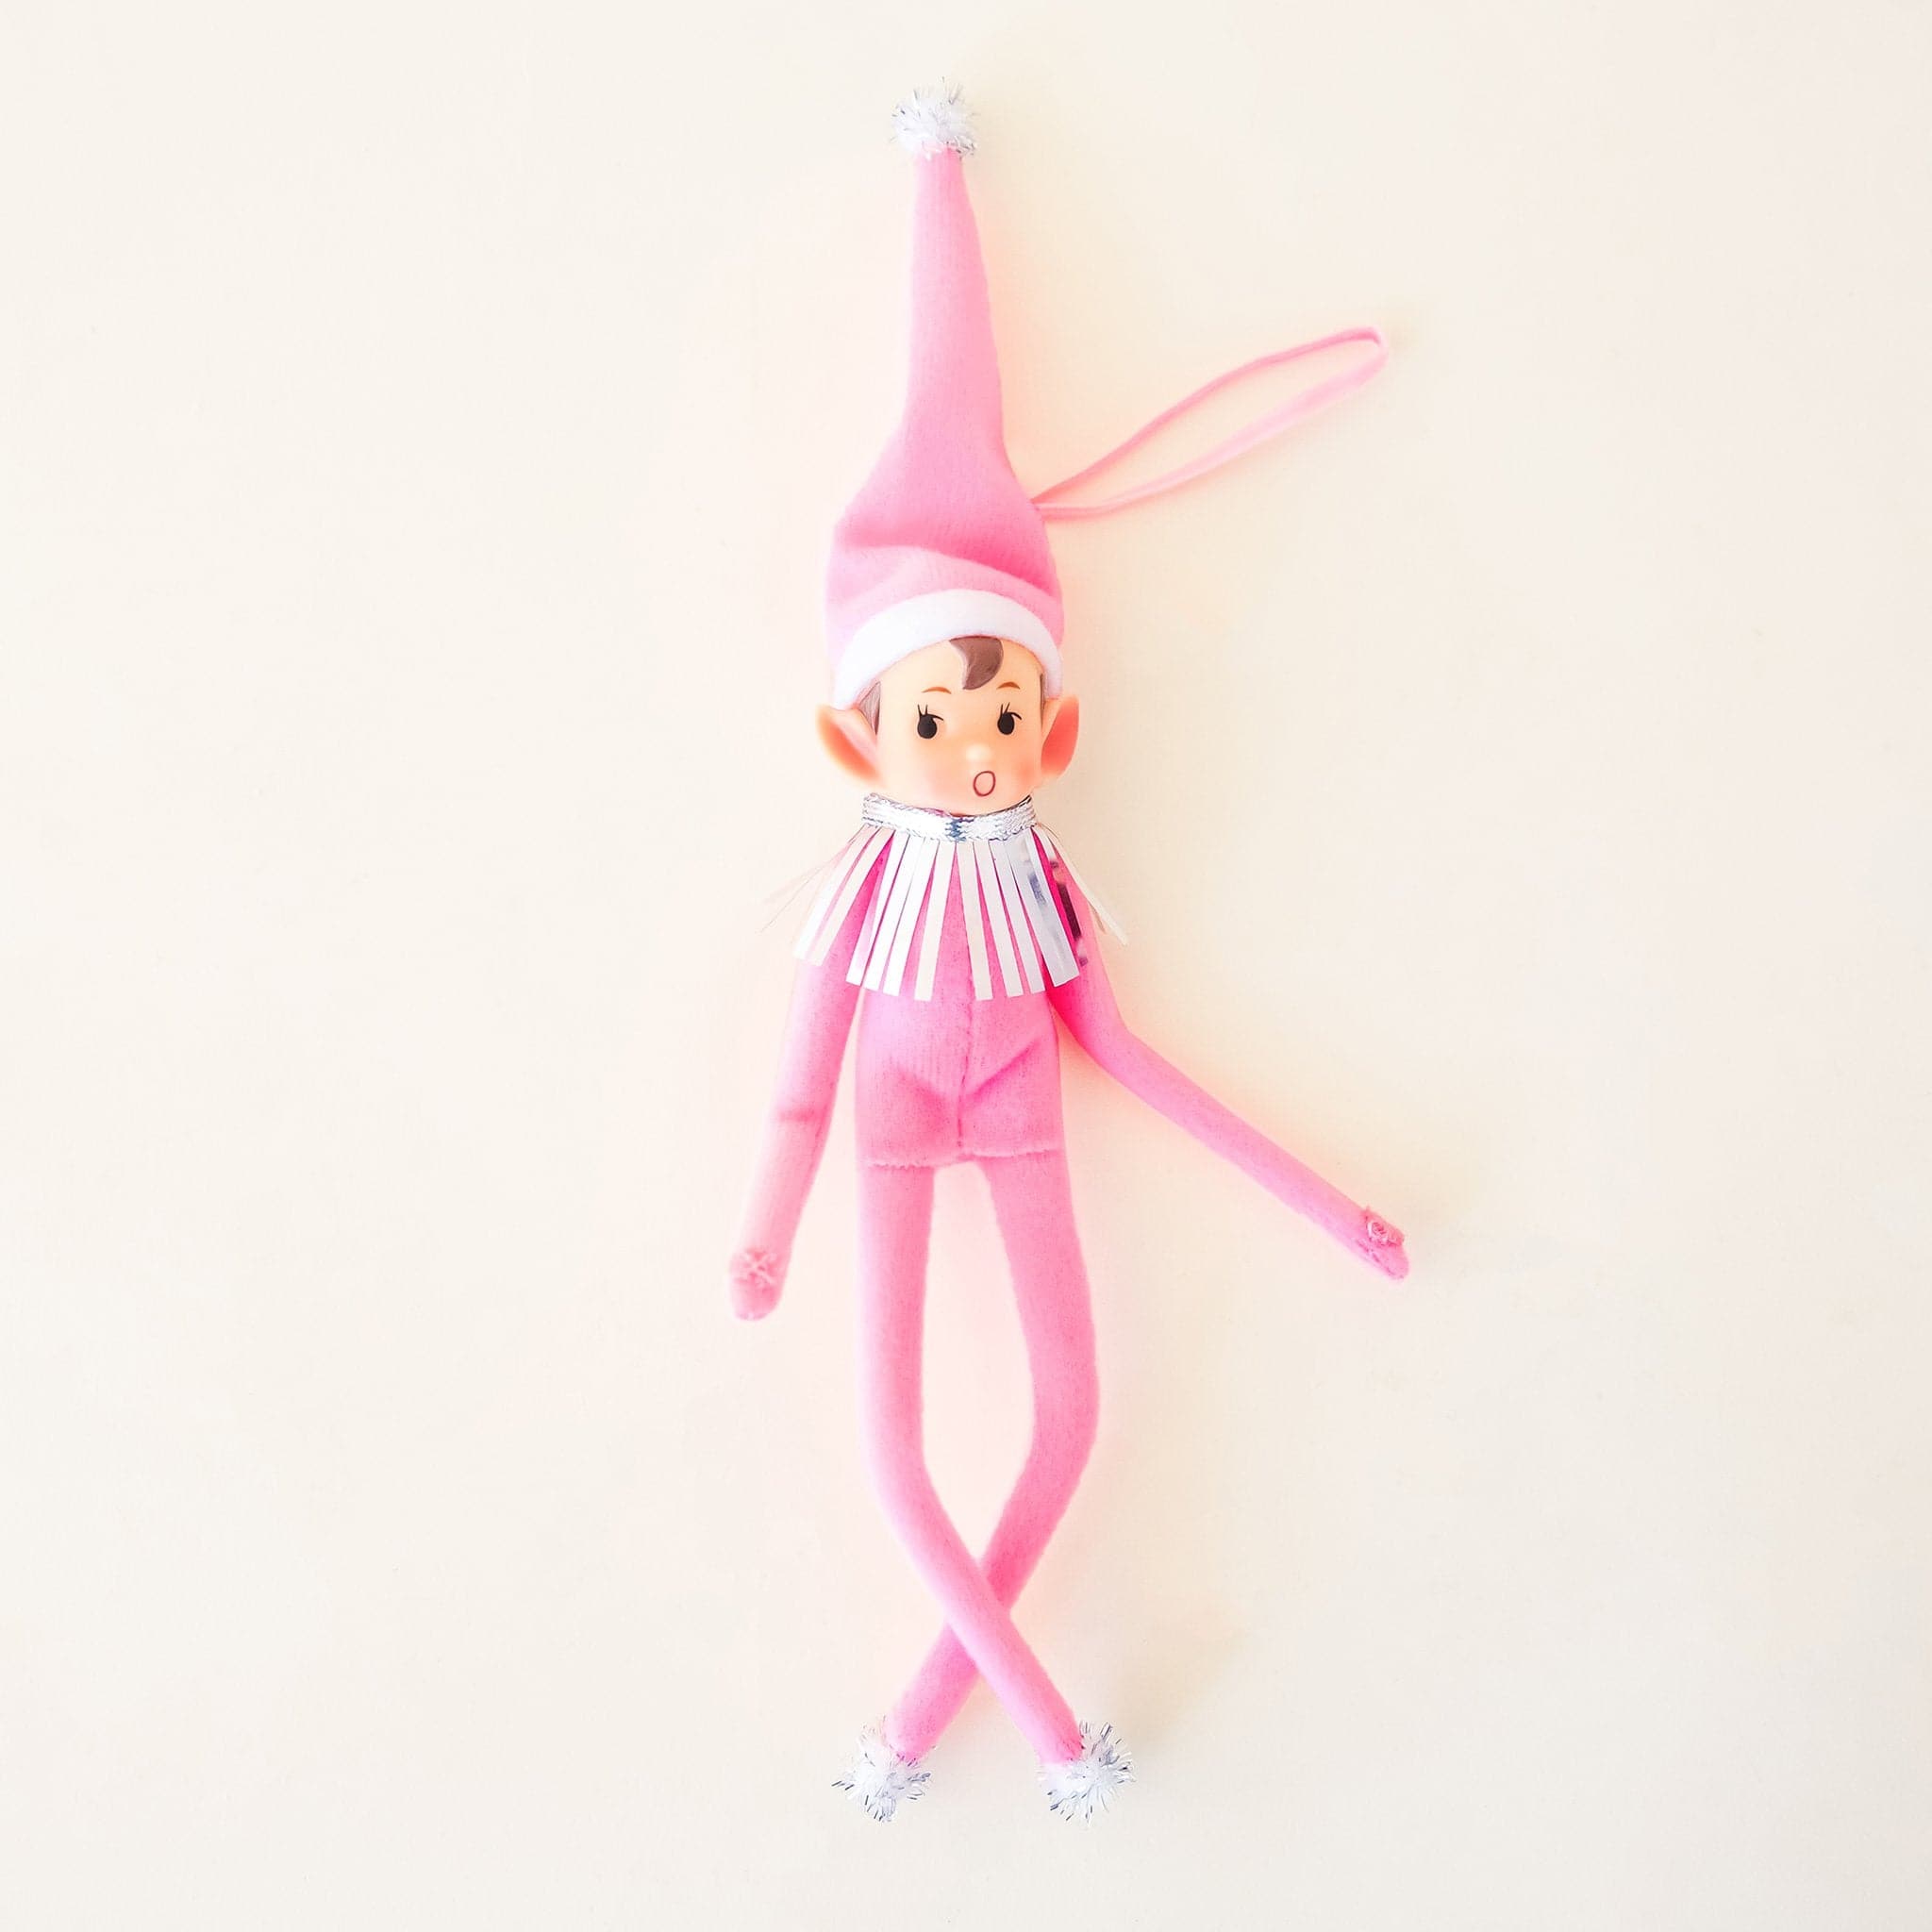 On a cream background is a elf ornament with long arms and legs with a pink suit and hat on as well as a pink string loop for hanging. 